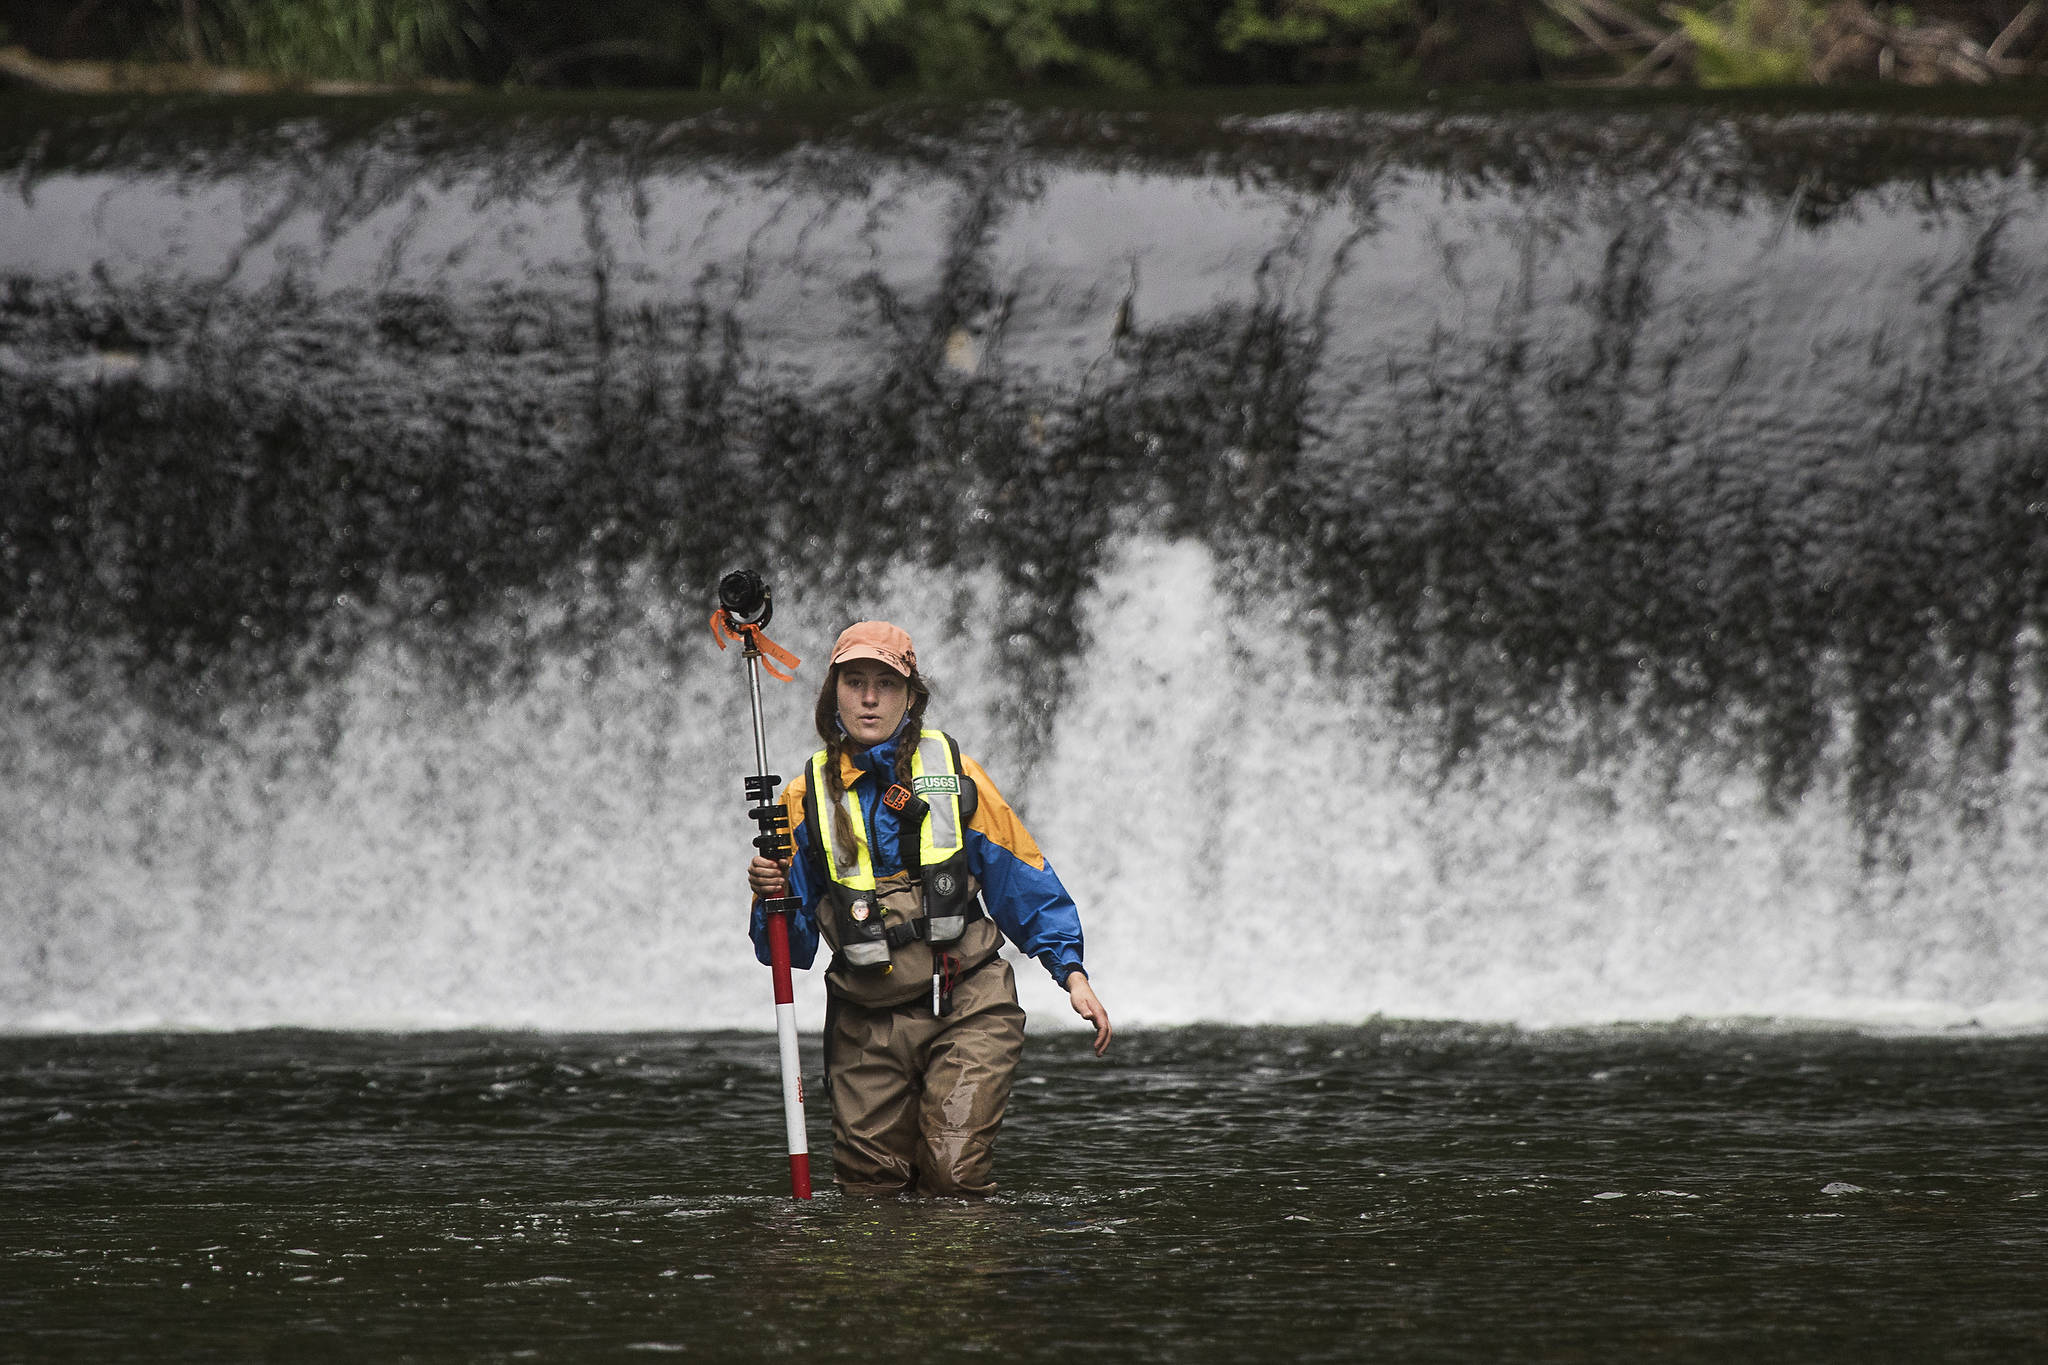 With the Pilchuck Dam behind her, Katie Seguin of the U.S. Geological Survey holds a prism pole while standing in the Pilchuck River on Tuesday in Granite Falls. Crews were mapping the riverbed to track how sediment will move once the dam is removed. (Andy Bronson / The Herald)